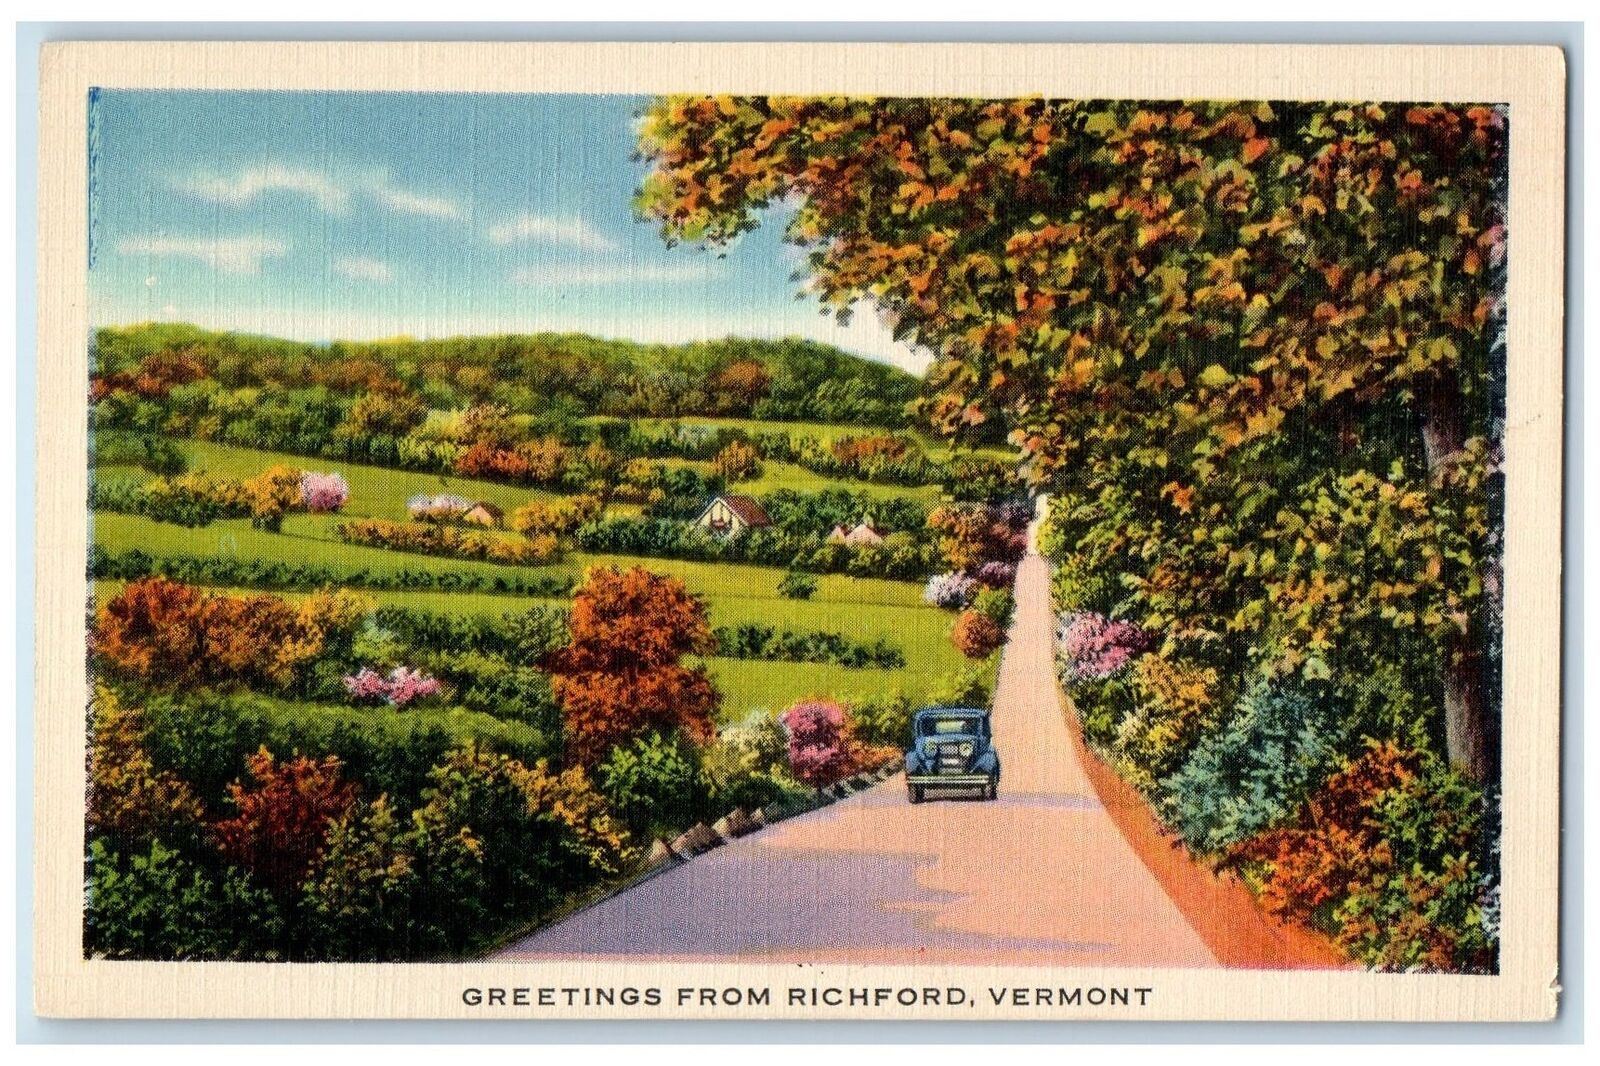 Greetings From Richford Vermont VT, Car Road Trees Scene Vintage Postcard